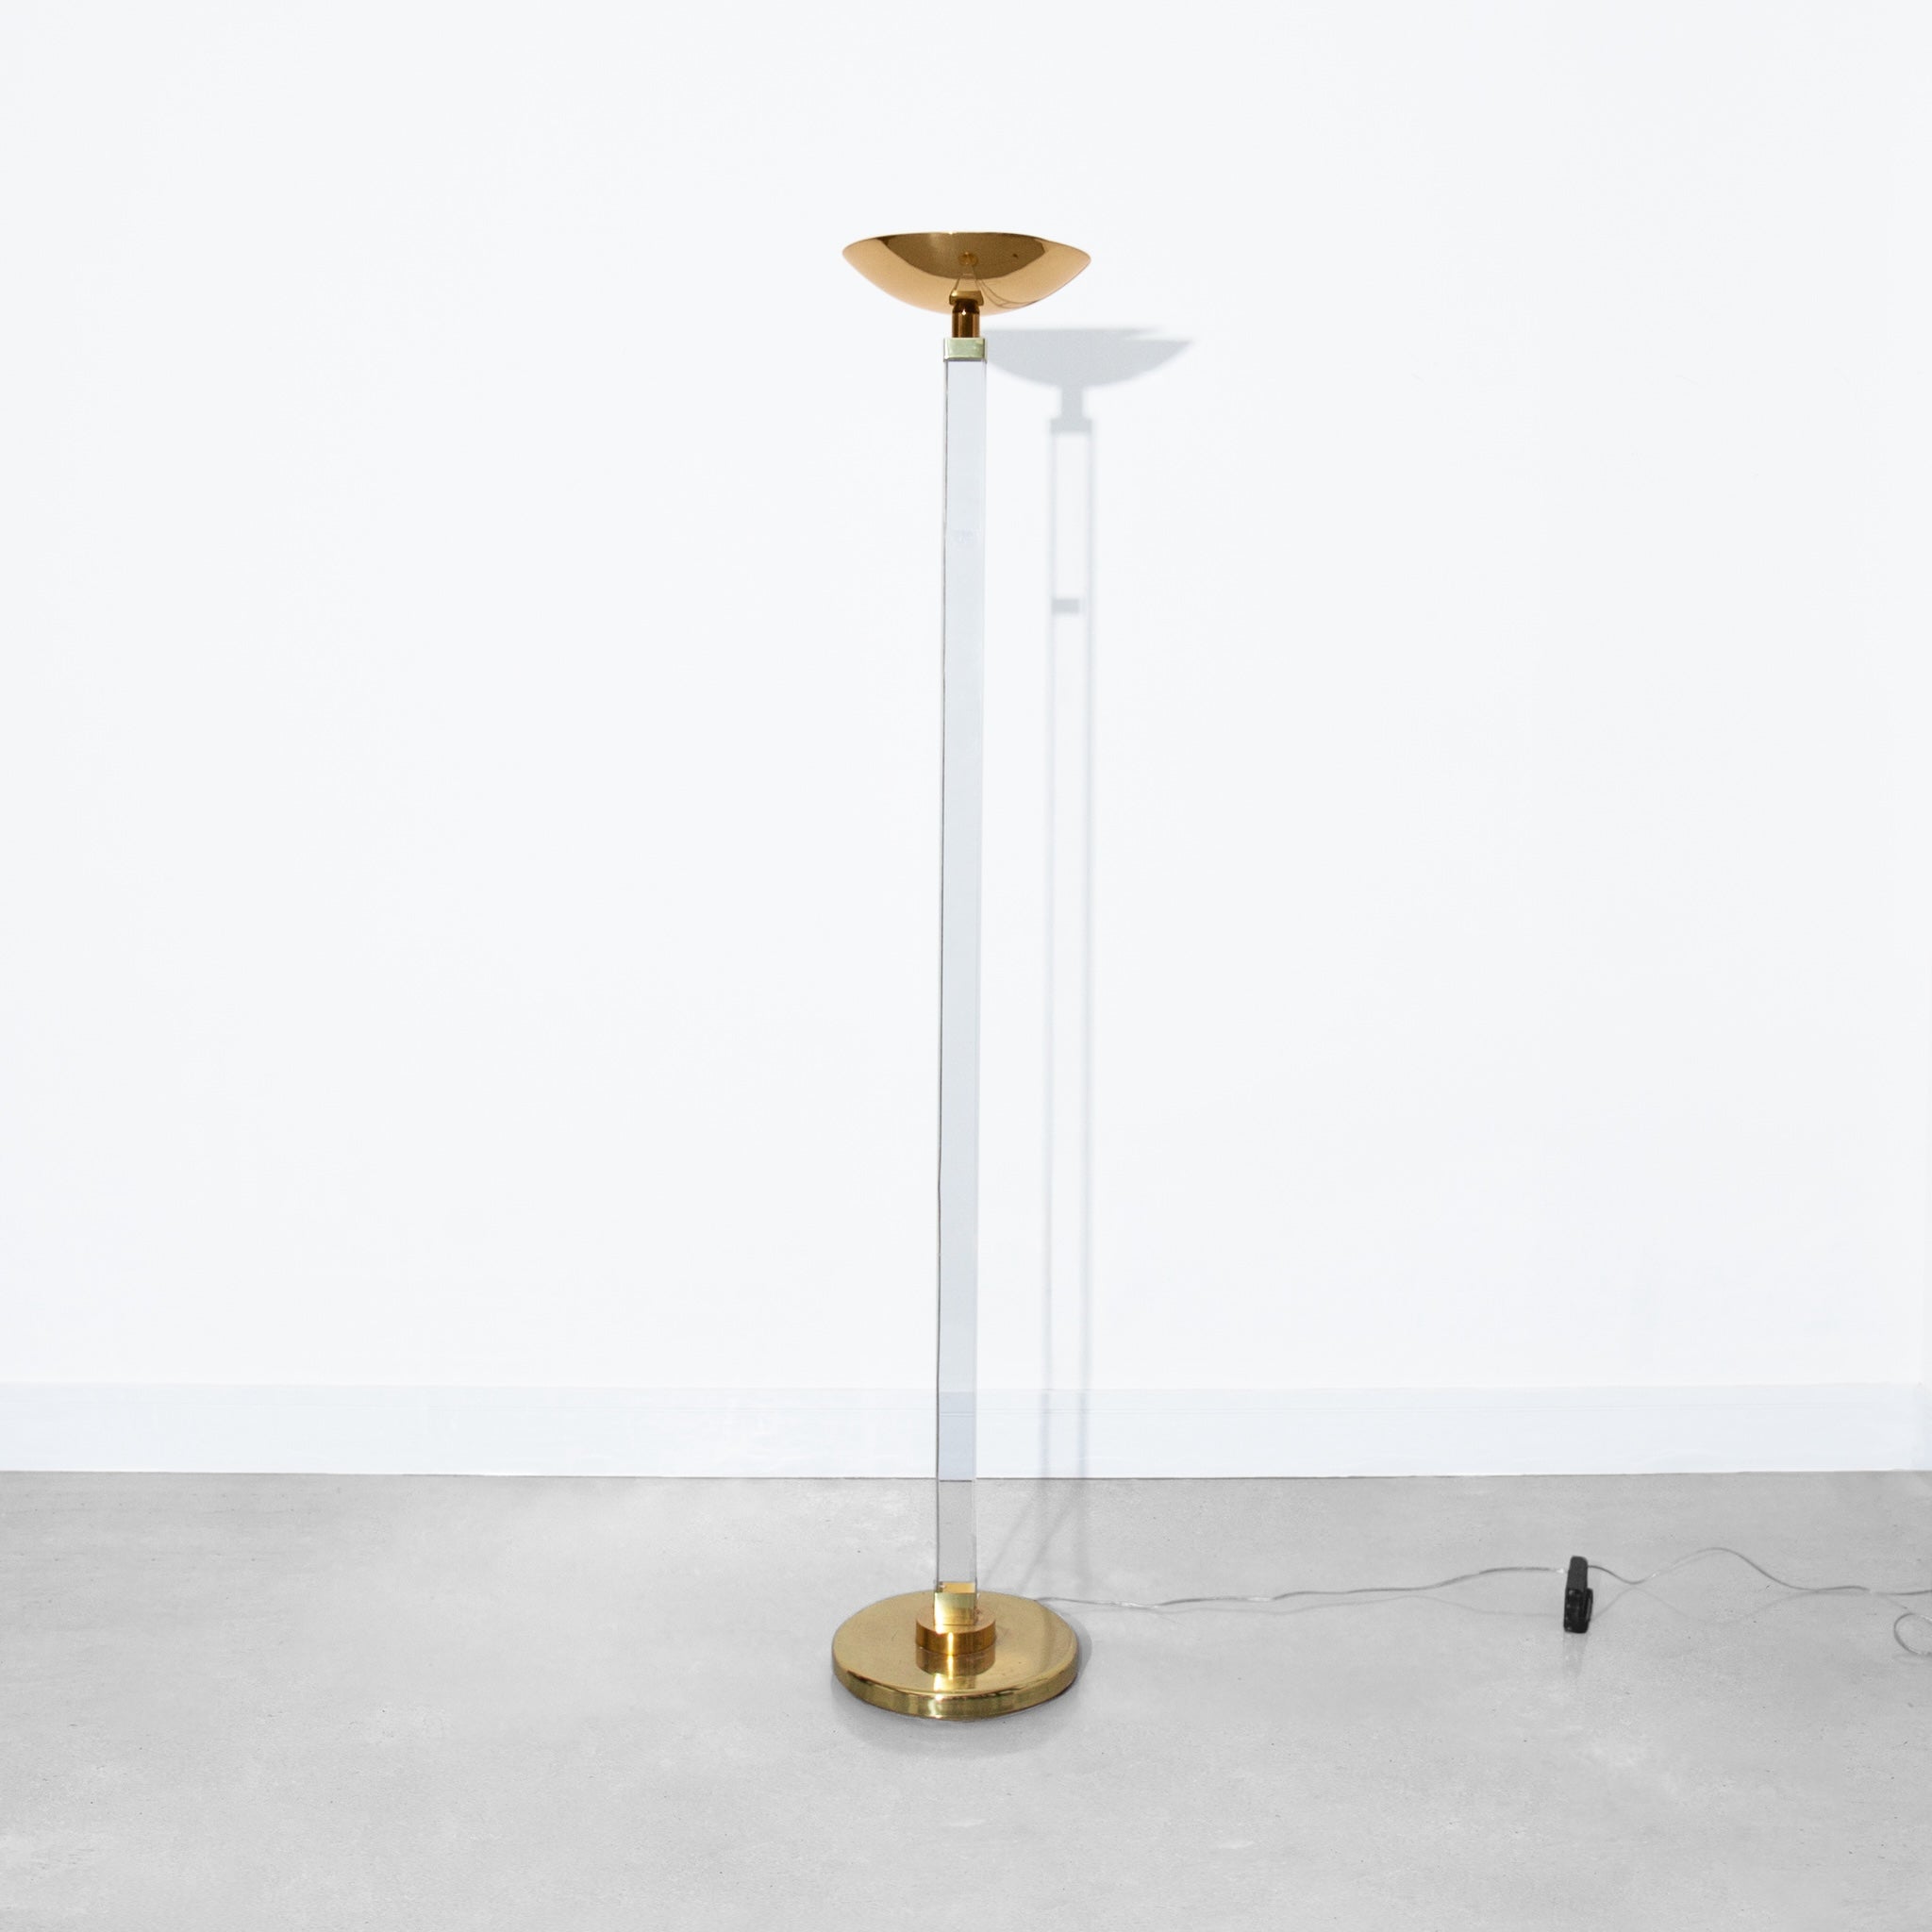 Italian Lucite and Brass Torchiere Floor Lamp